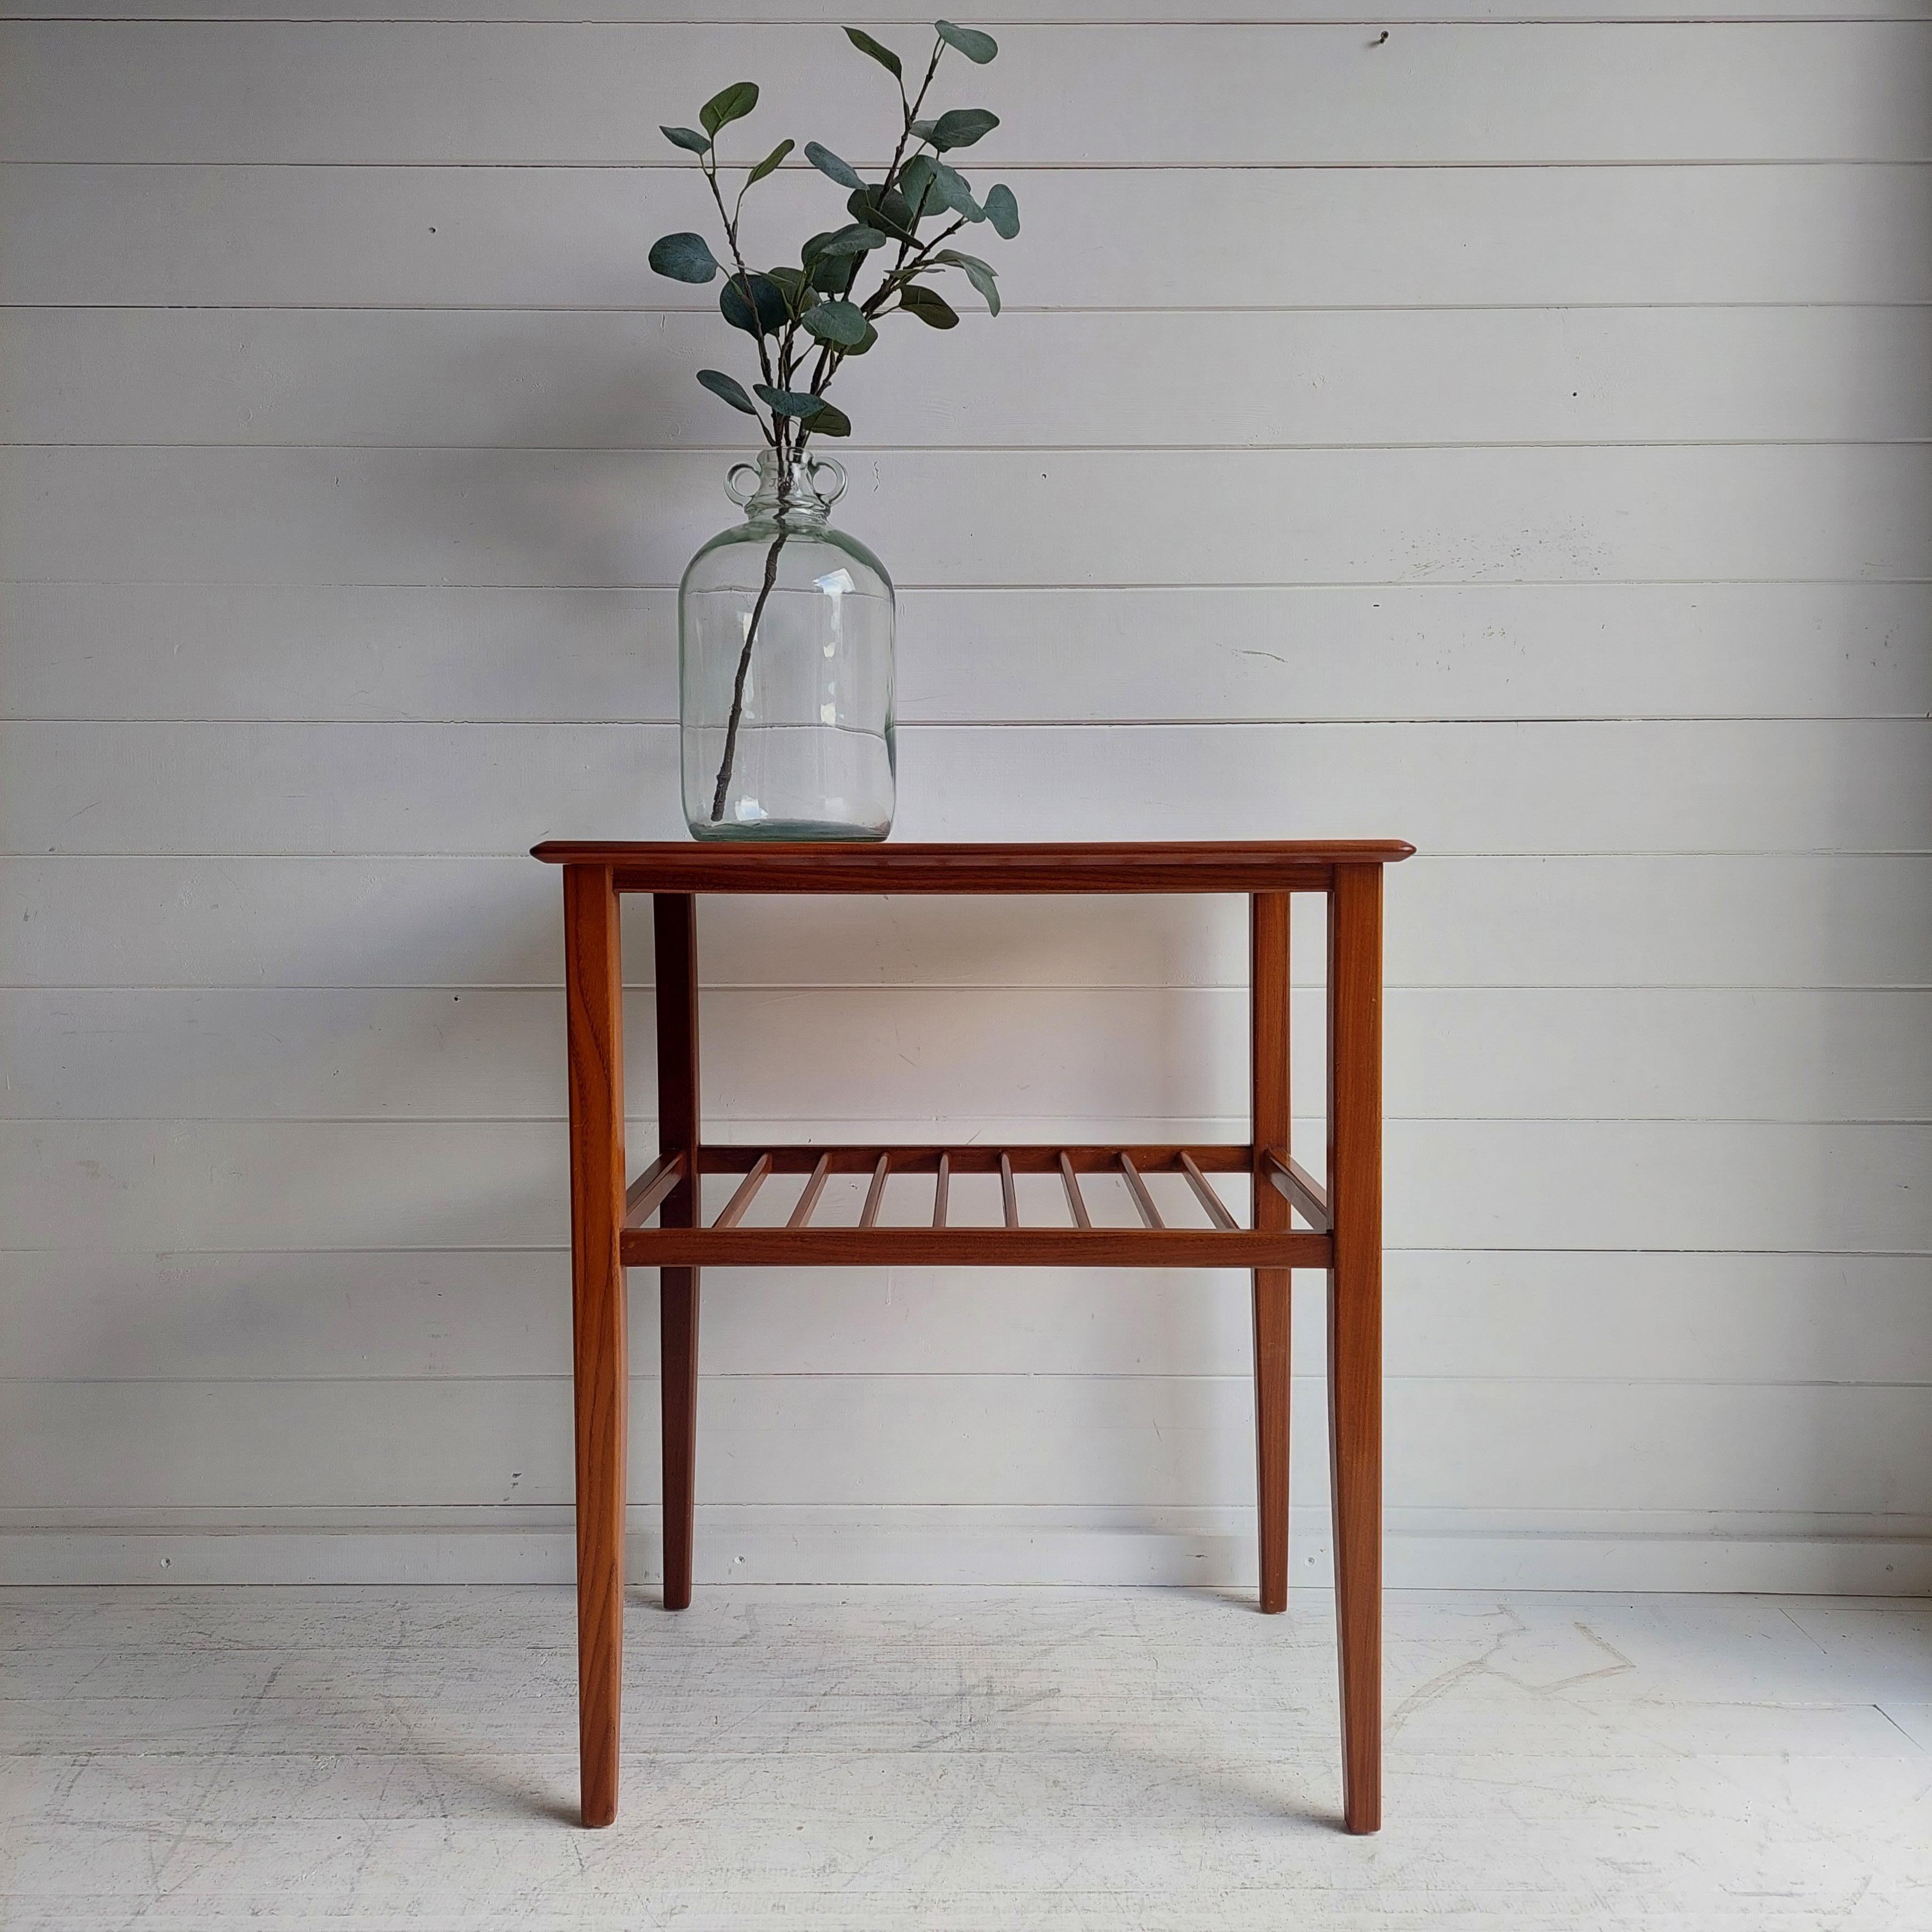 This is a beautiful example of Danish influenced midcentury Furniture.
We are delighted to offer for sale this 1960s Vintage Scandinavian Teak Side End Table made in England.
Designed by Richard Hornby for Fyne Ladye

A very well-made side table